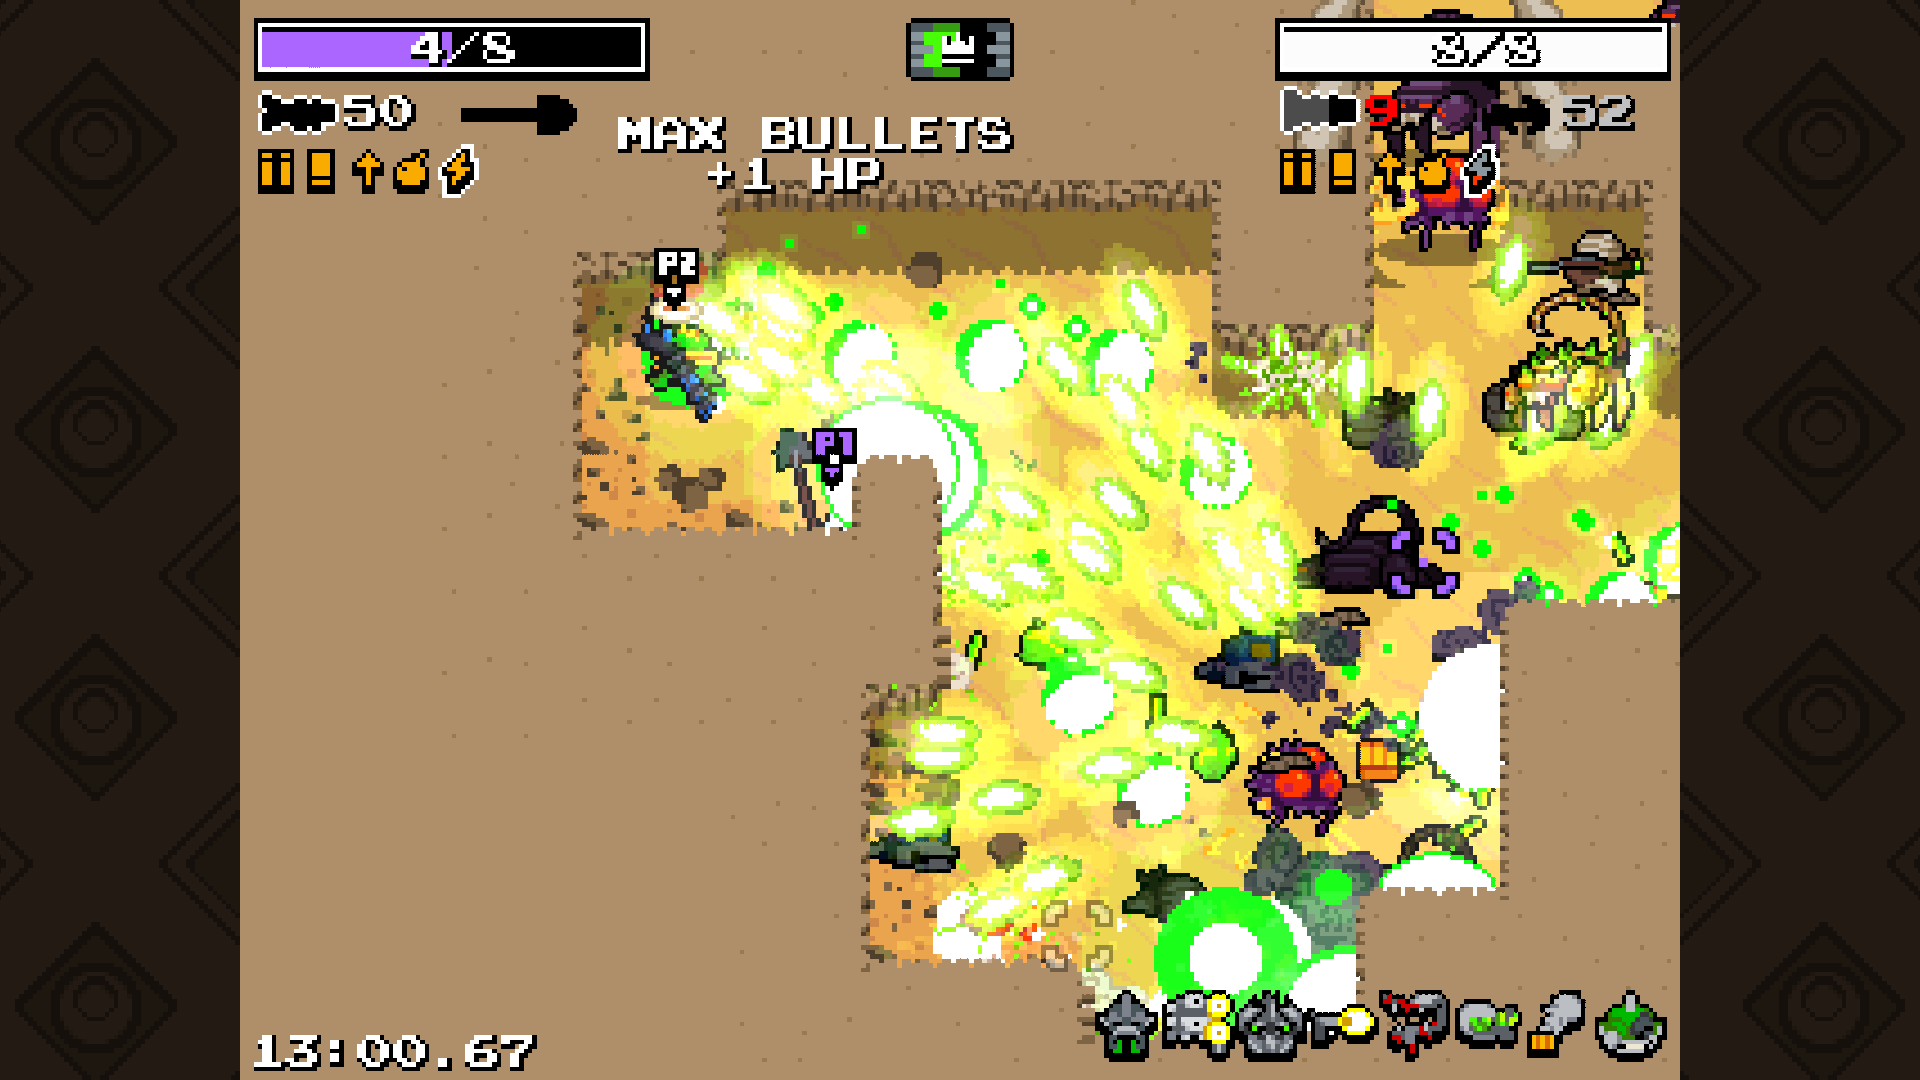 nuclear throne together